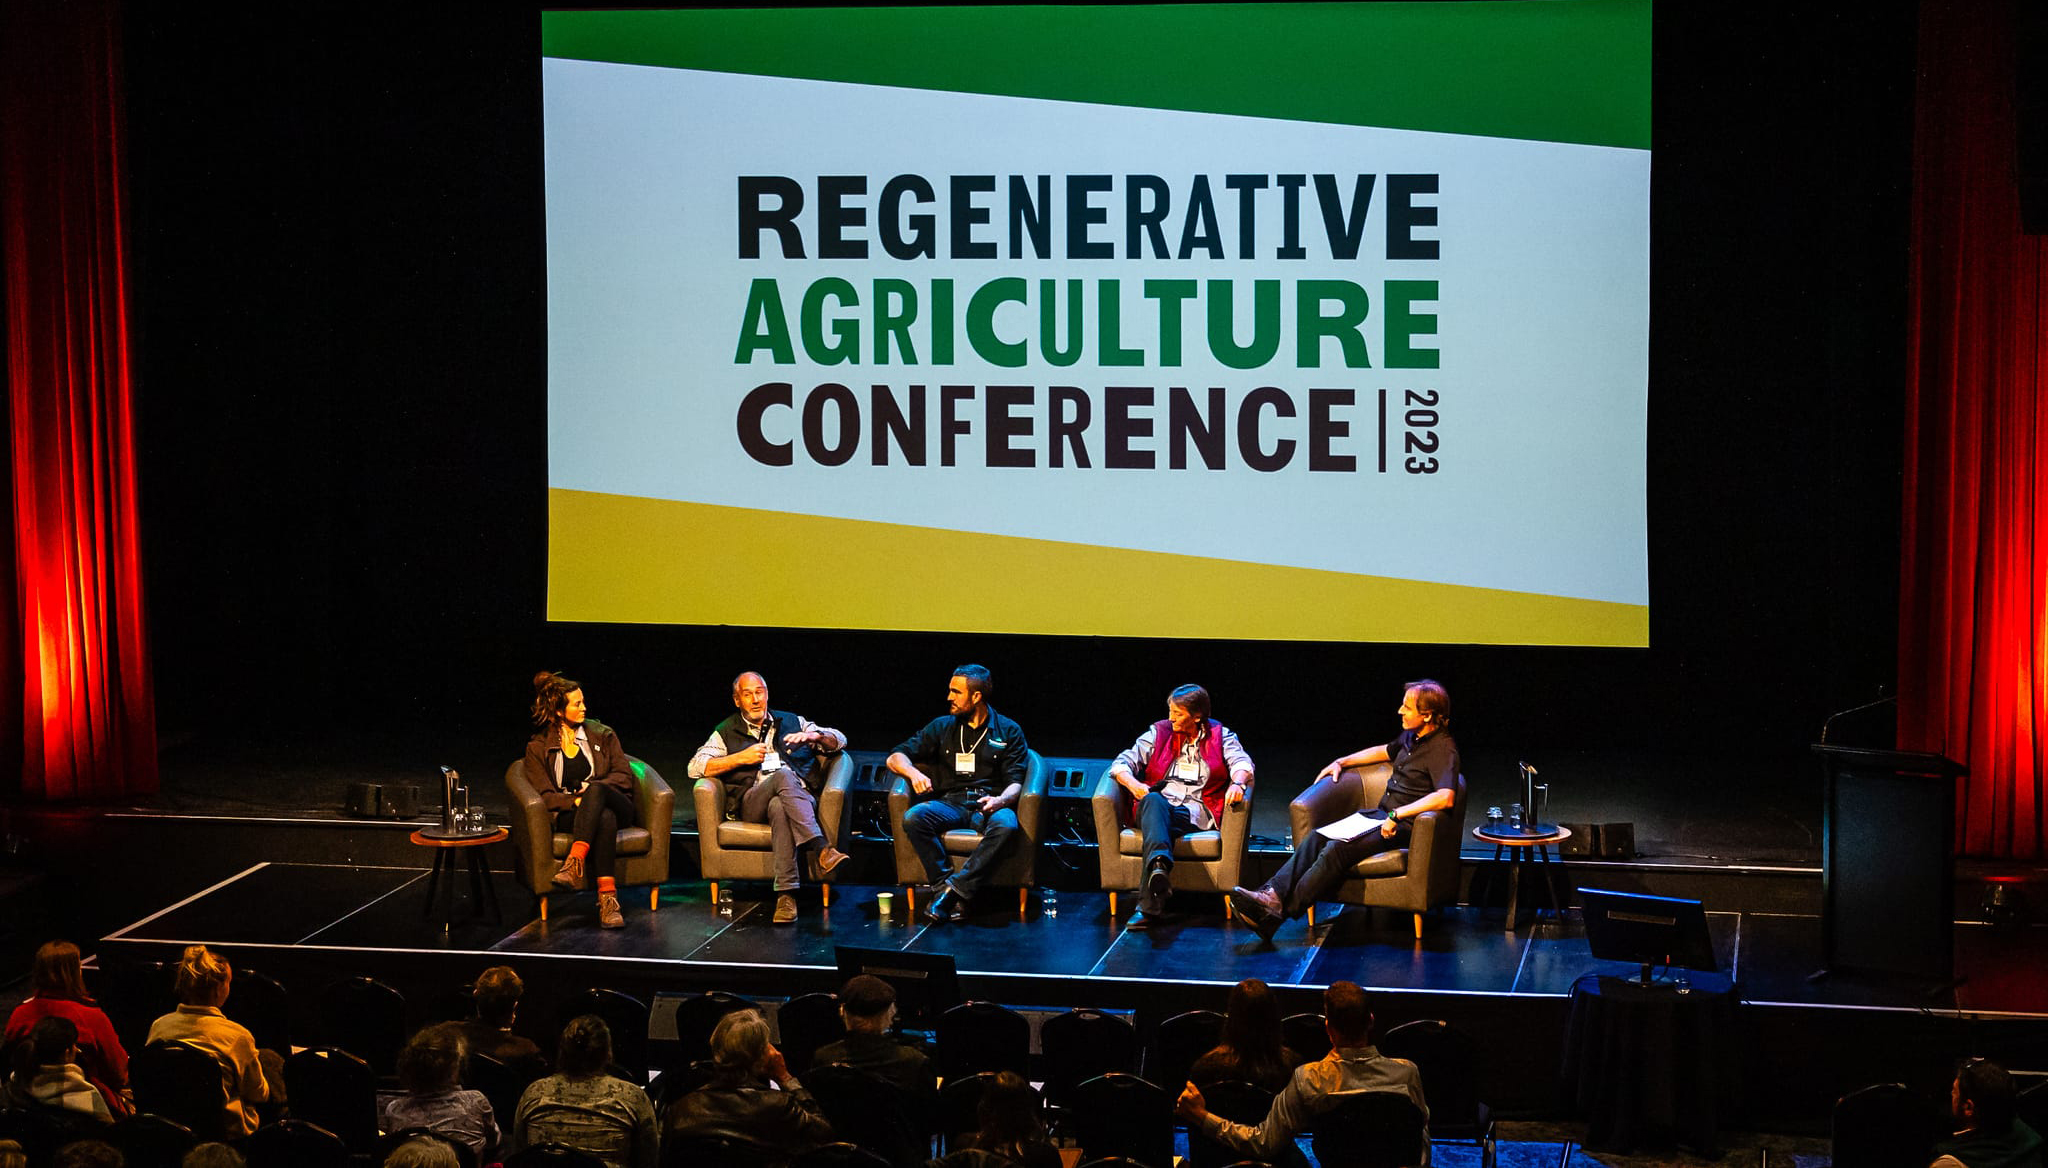 Regenerative Agriculture Conference Proves To Be an Outstanding Success